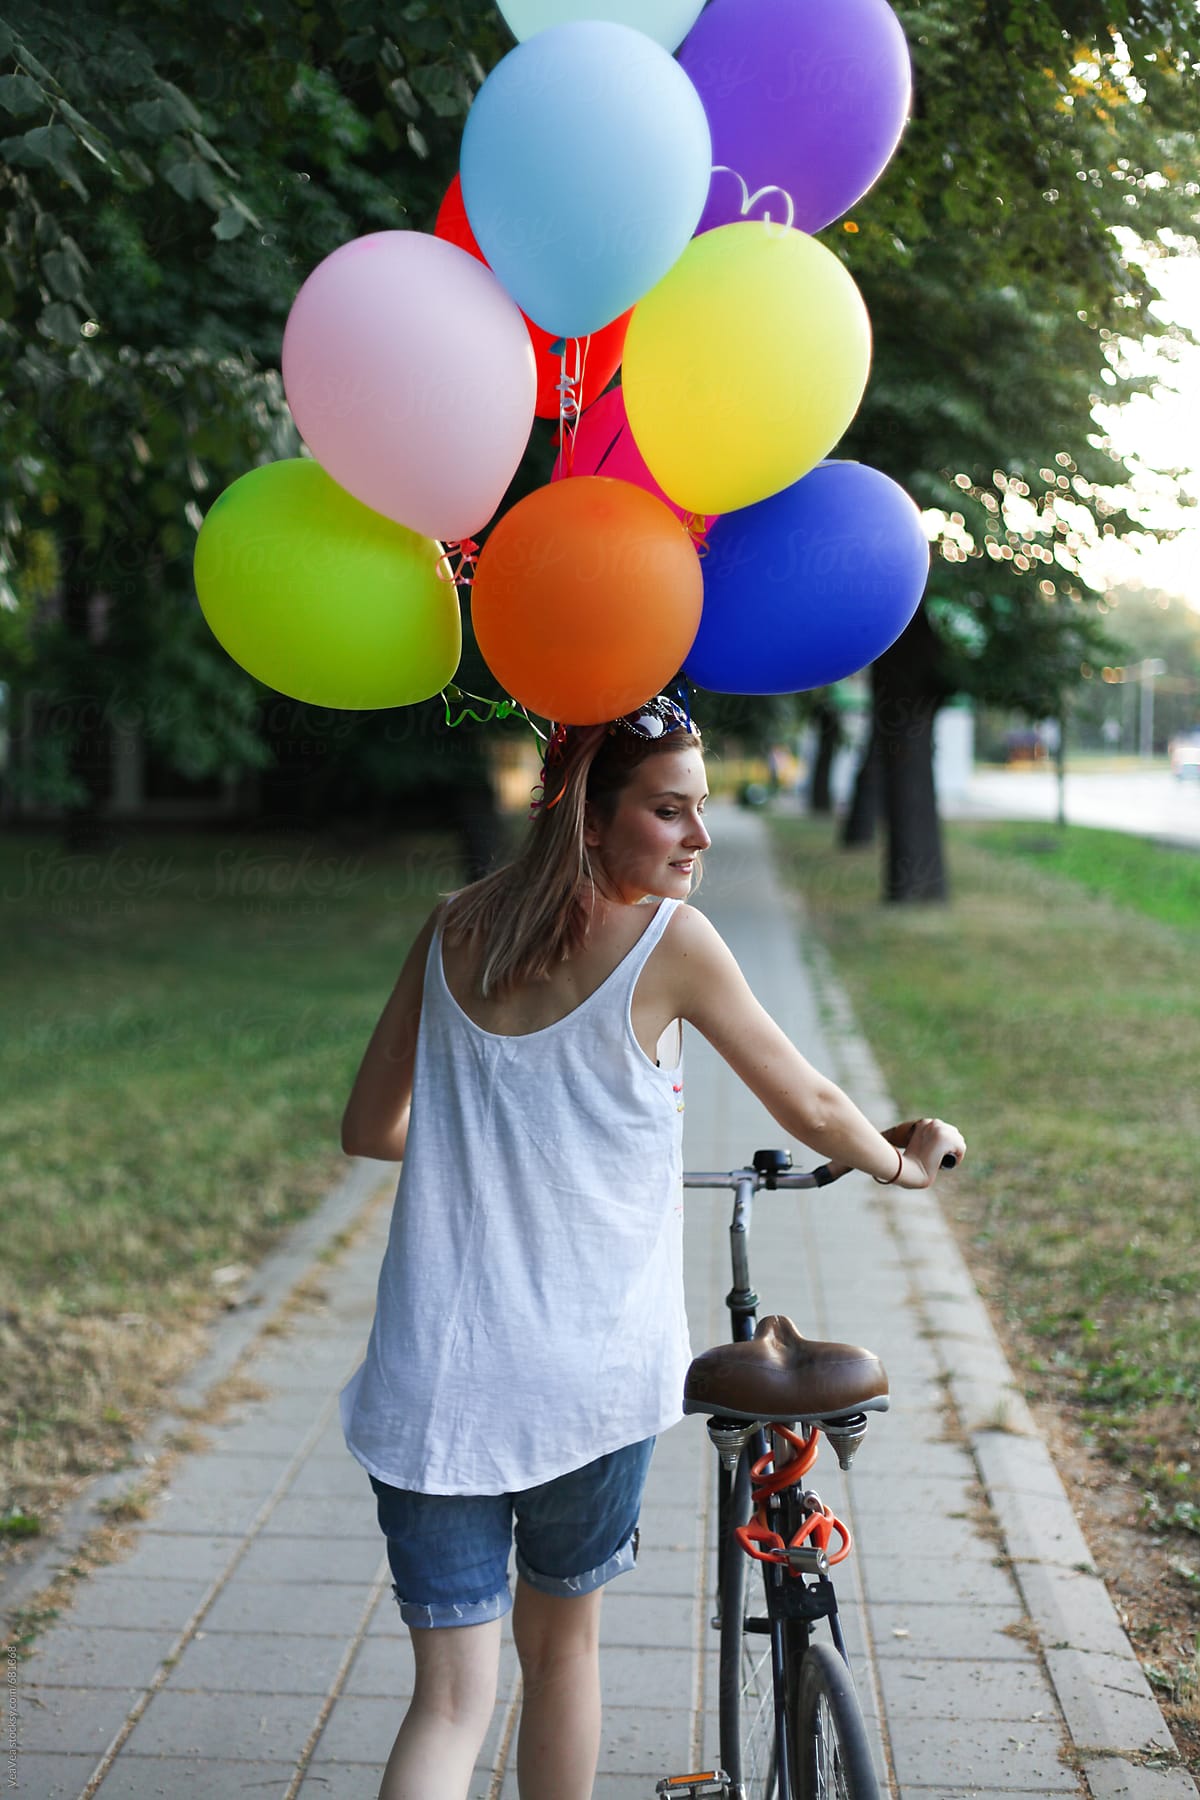 Woman walking with bicycle and colorful ballons